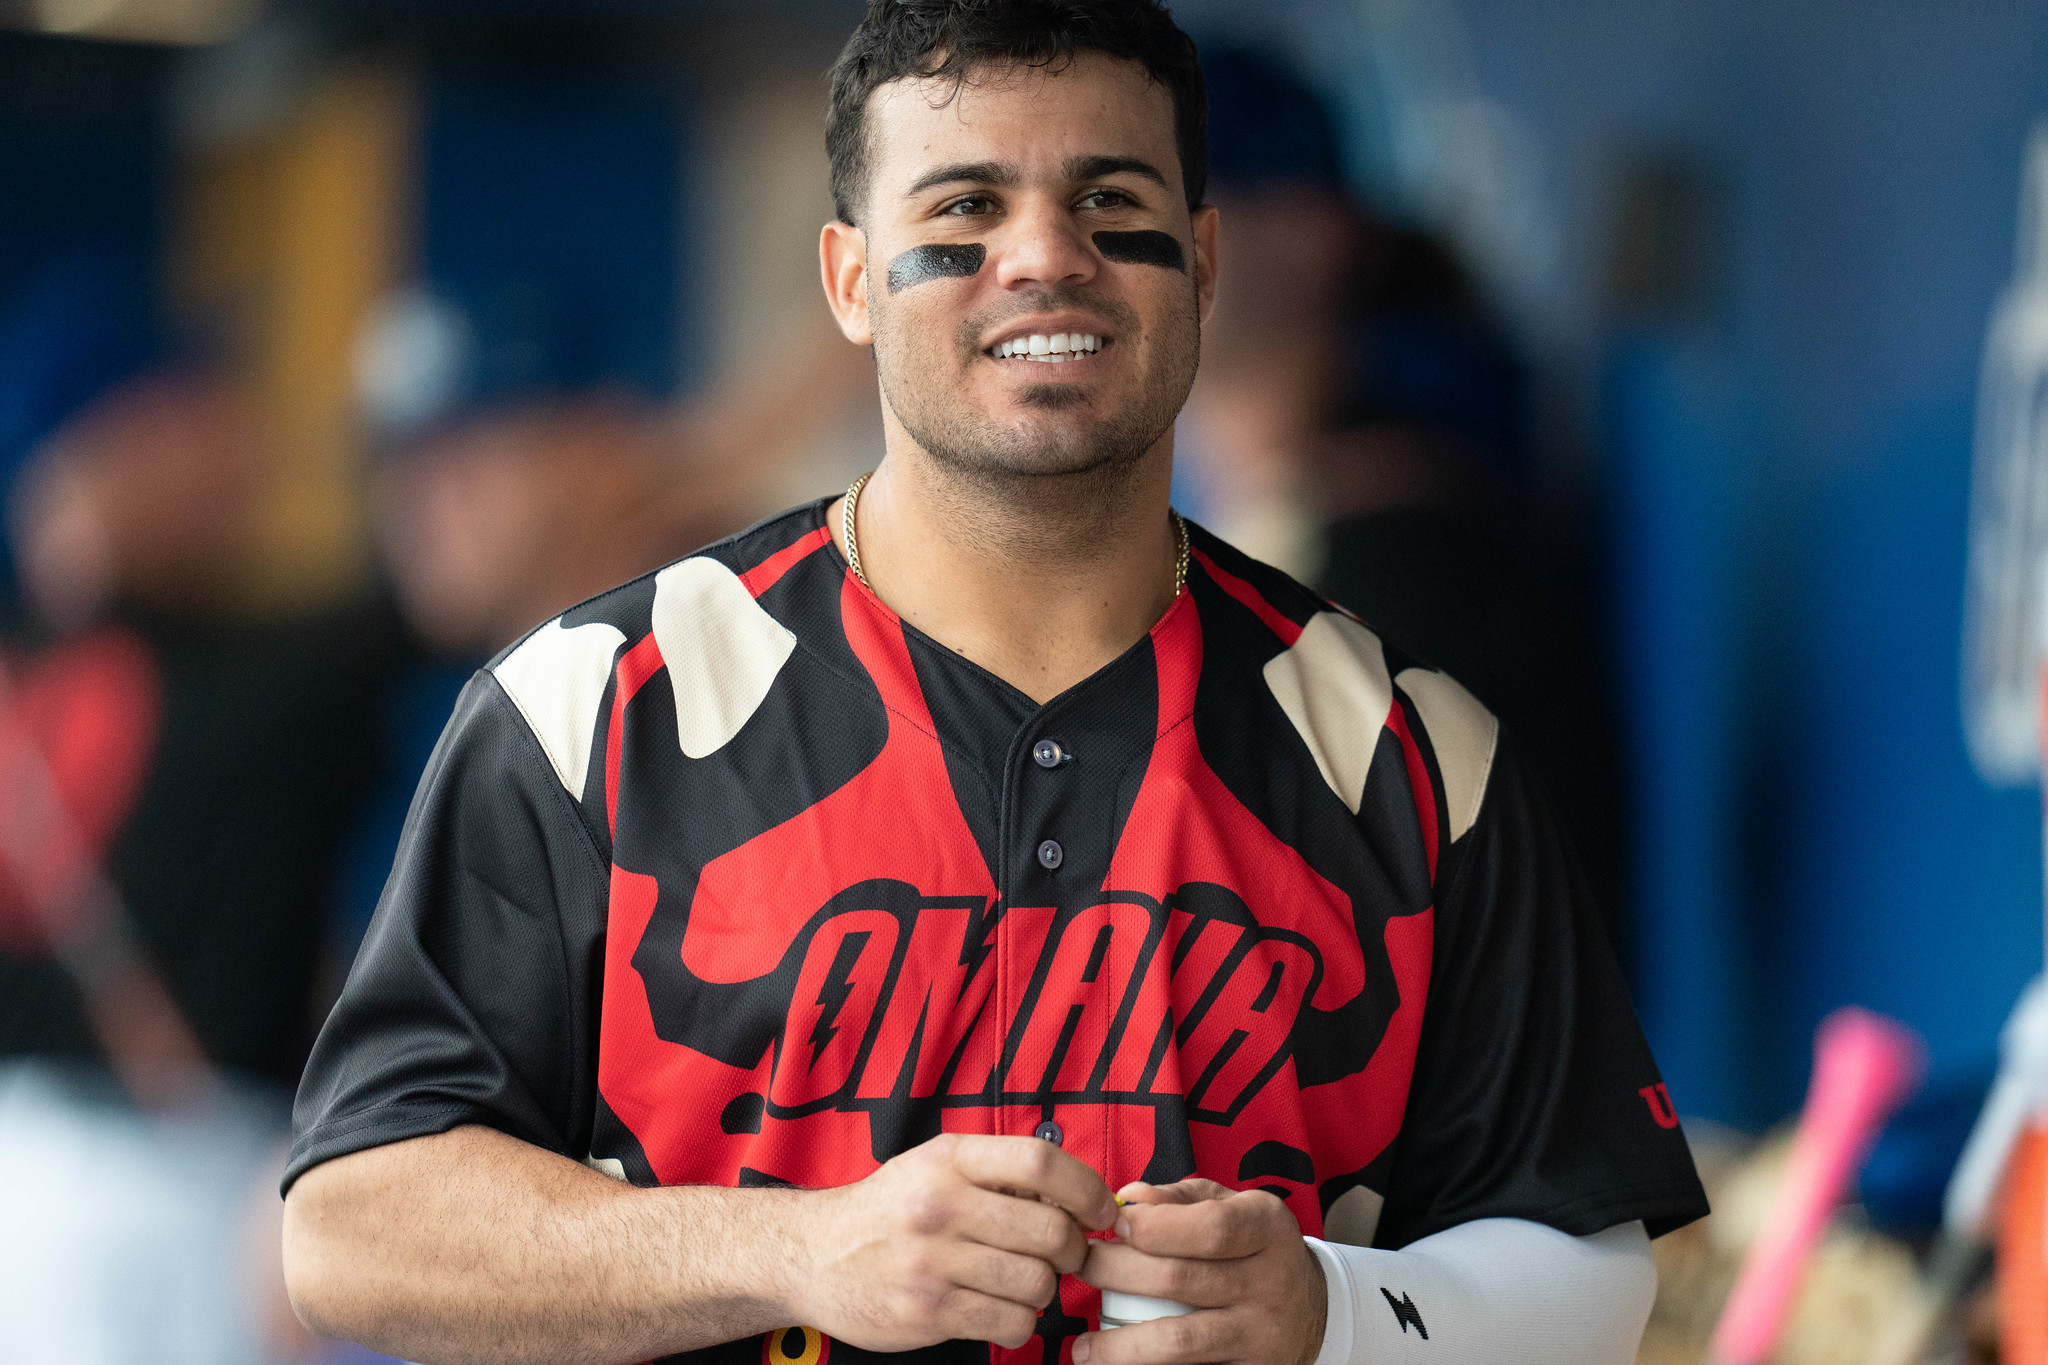 A baseball player with dark brown hair and eyeblack under both eyes standing in a dugout.